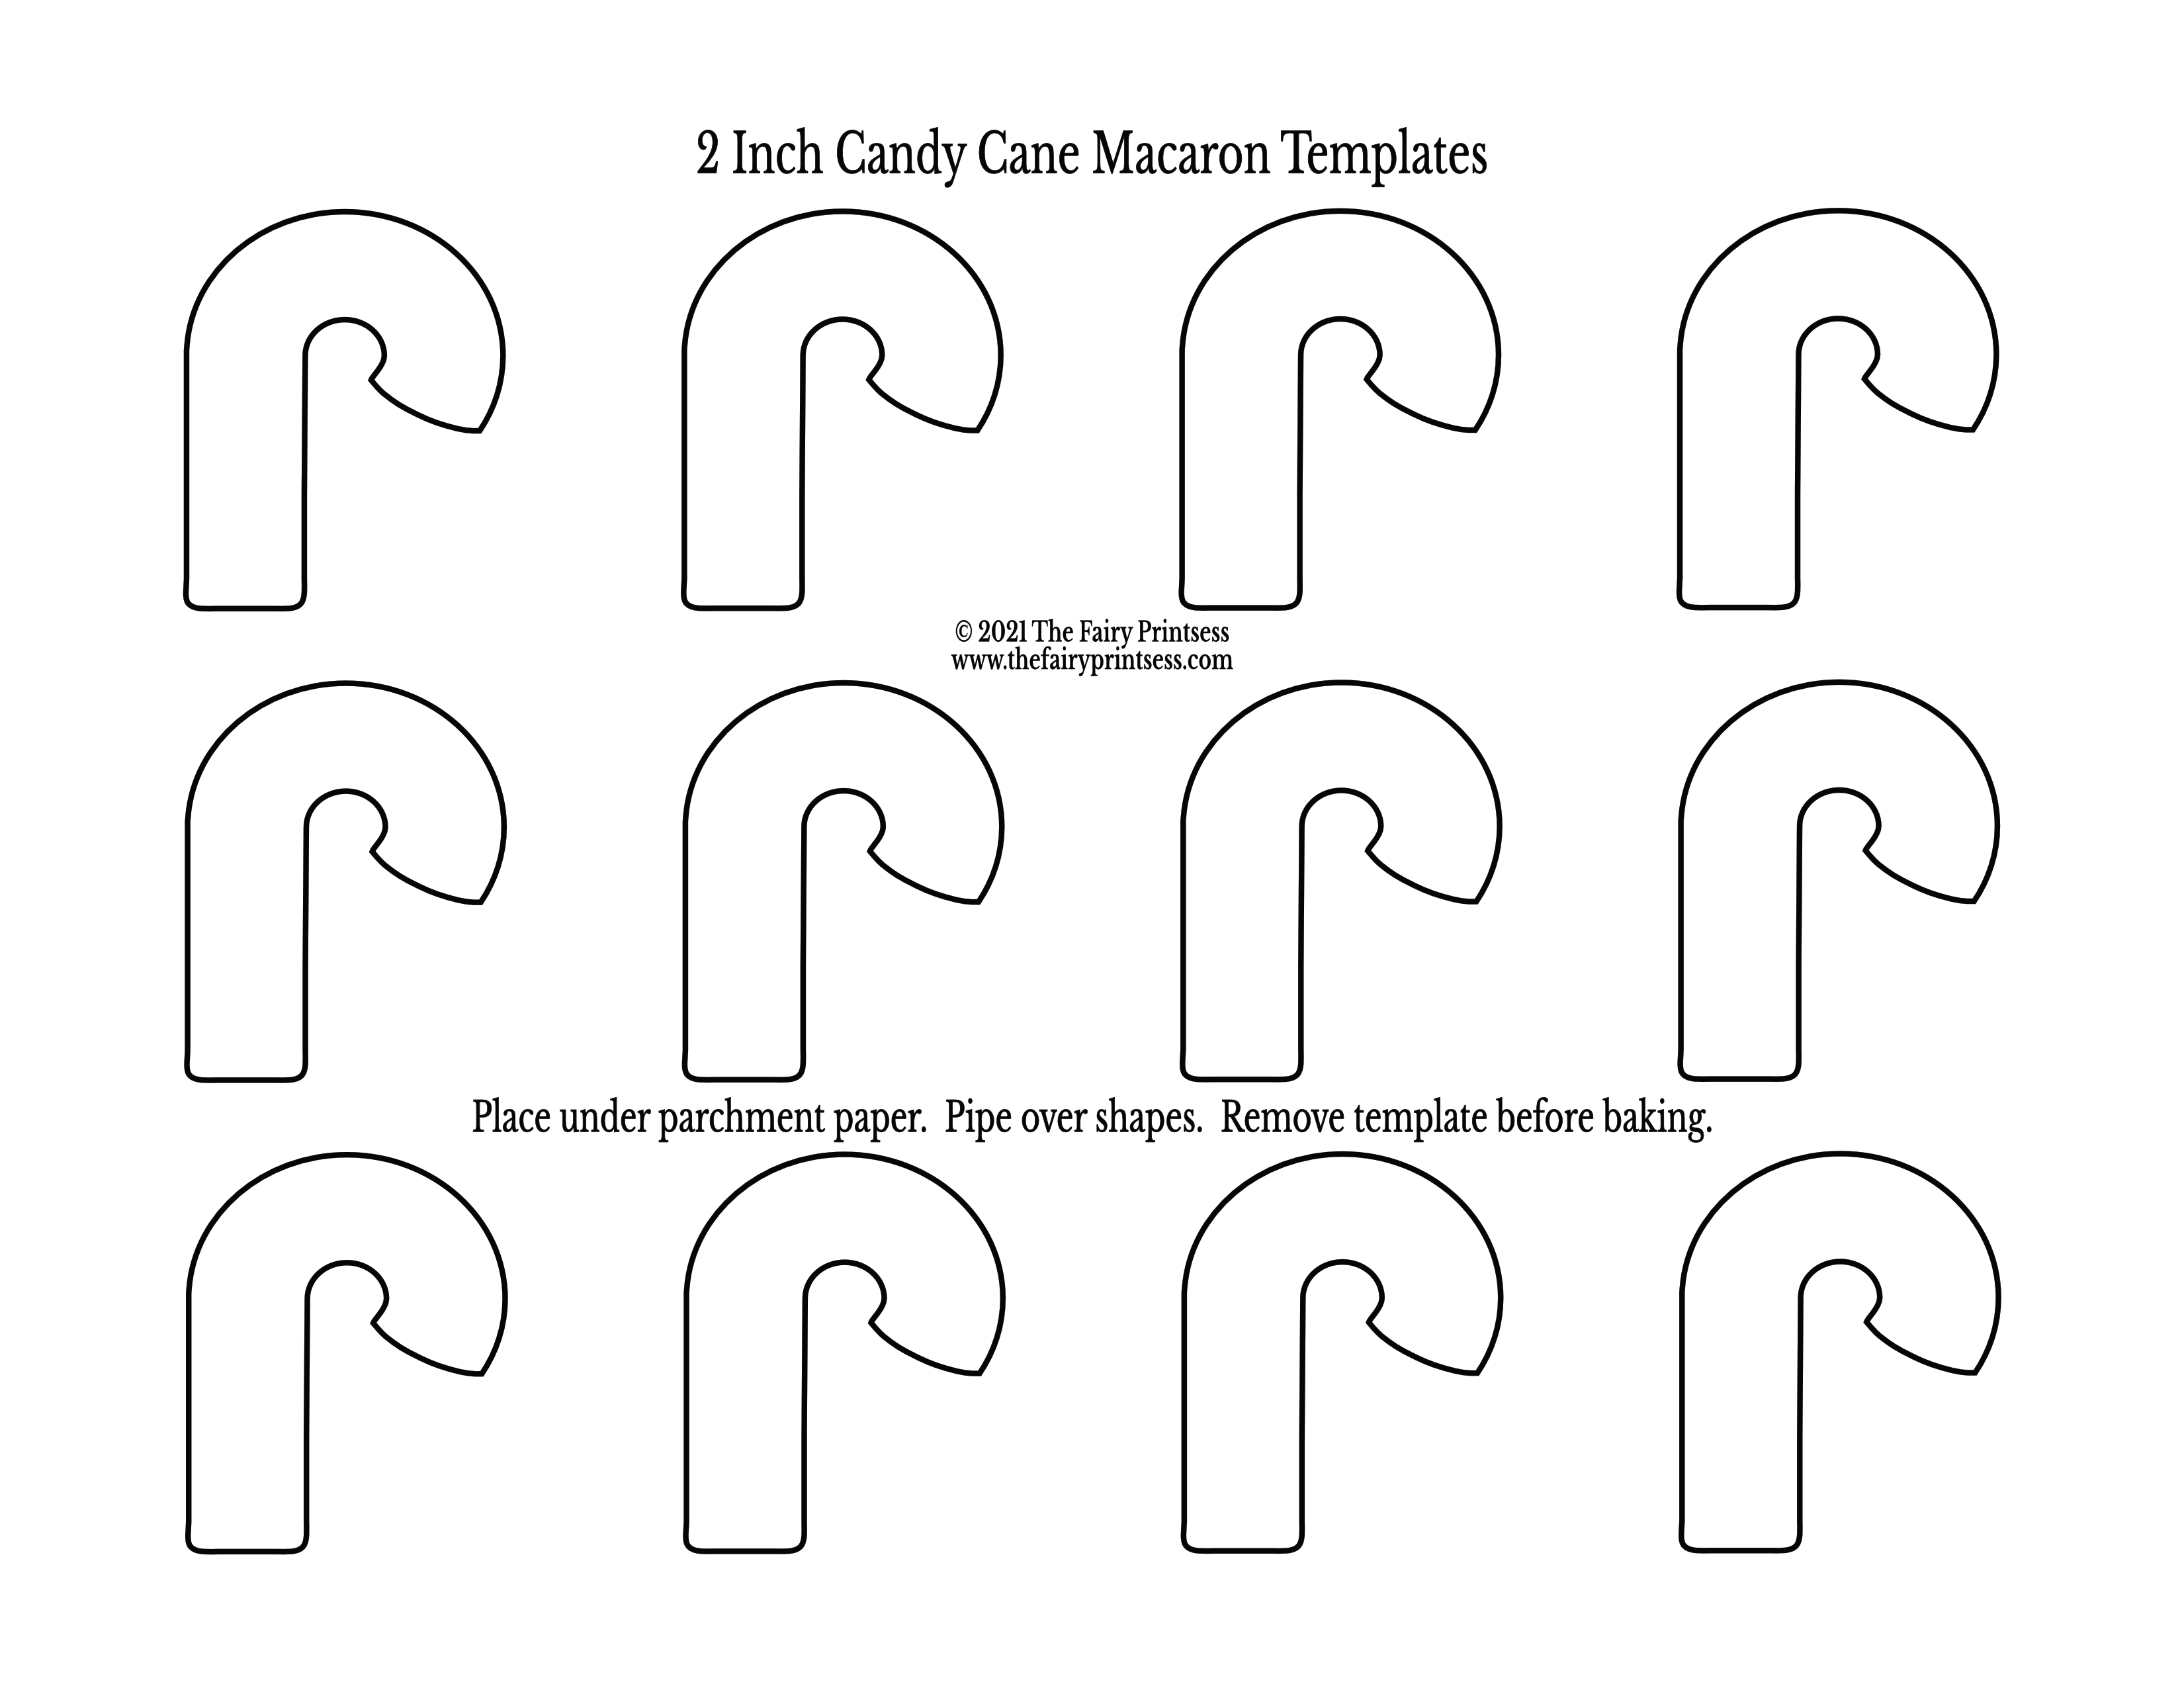 2 inch candy cane macaron template free printable